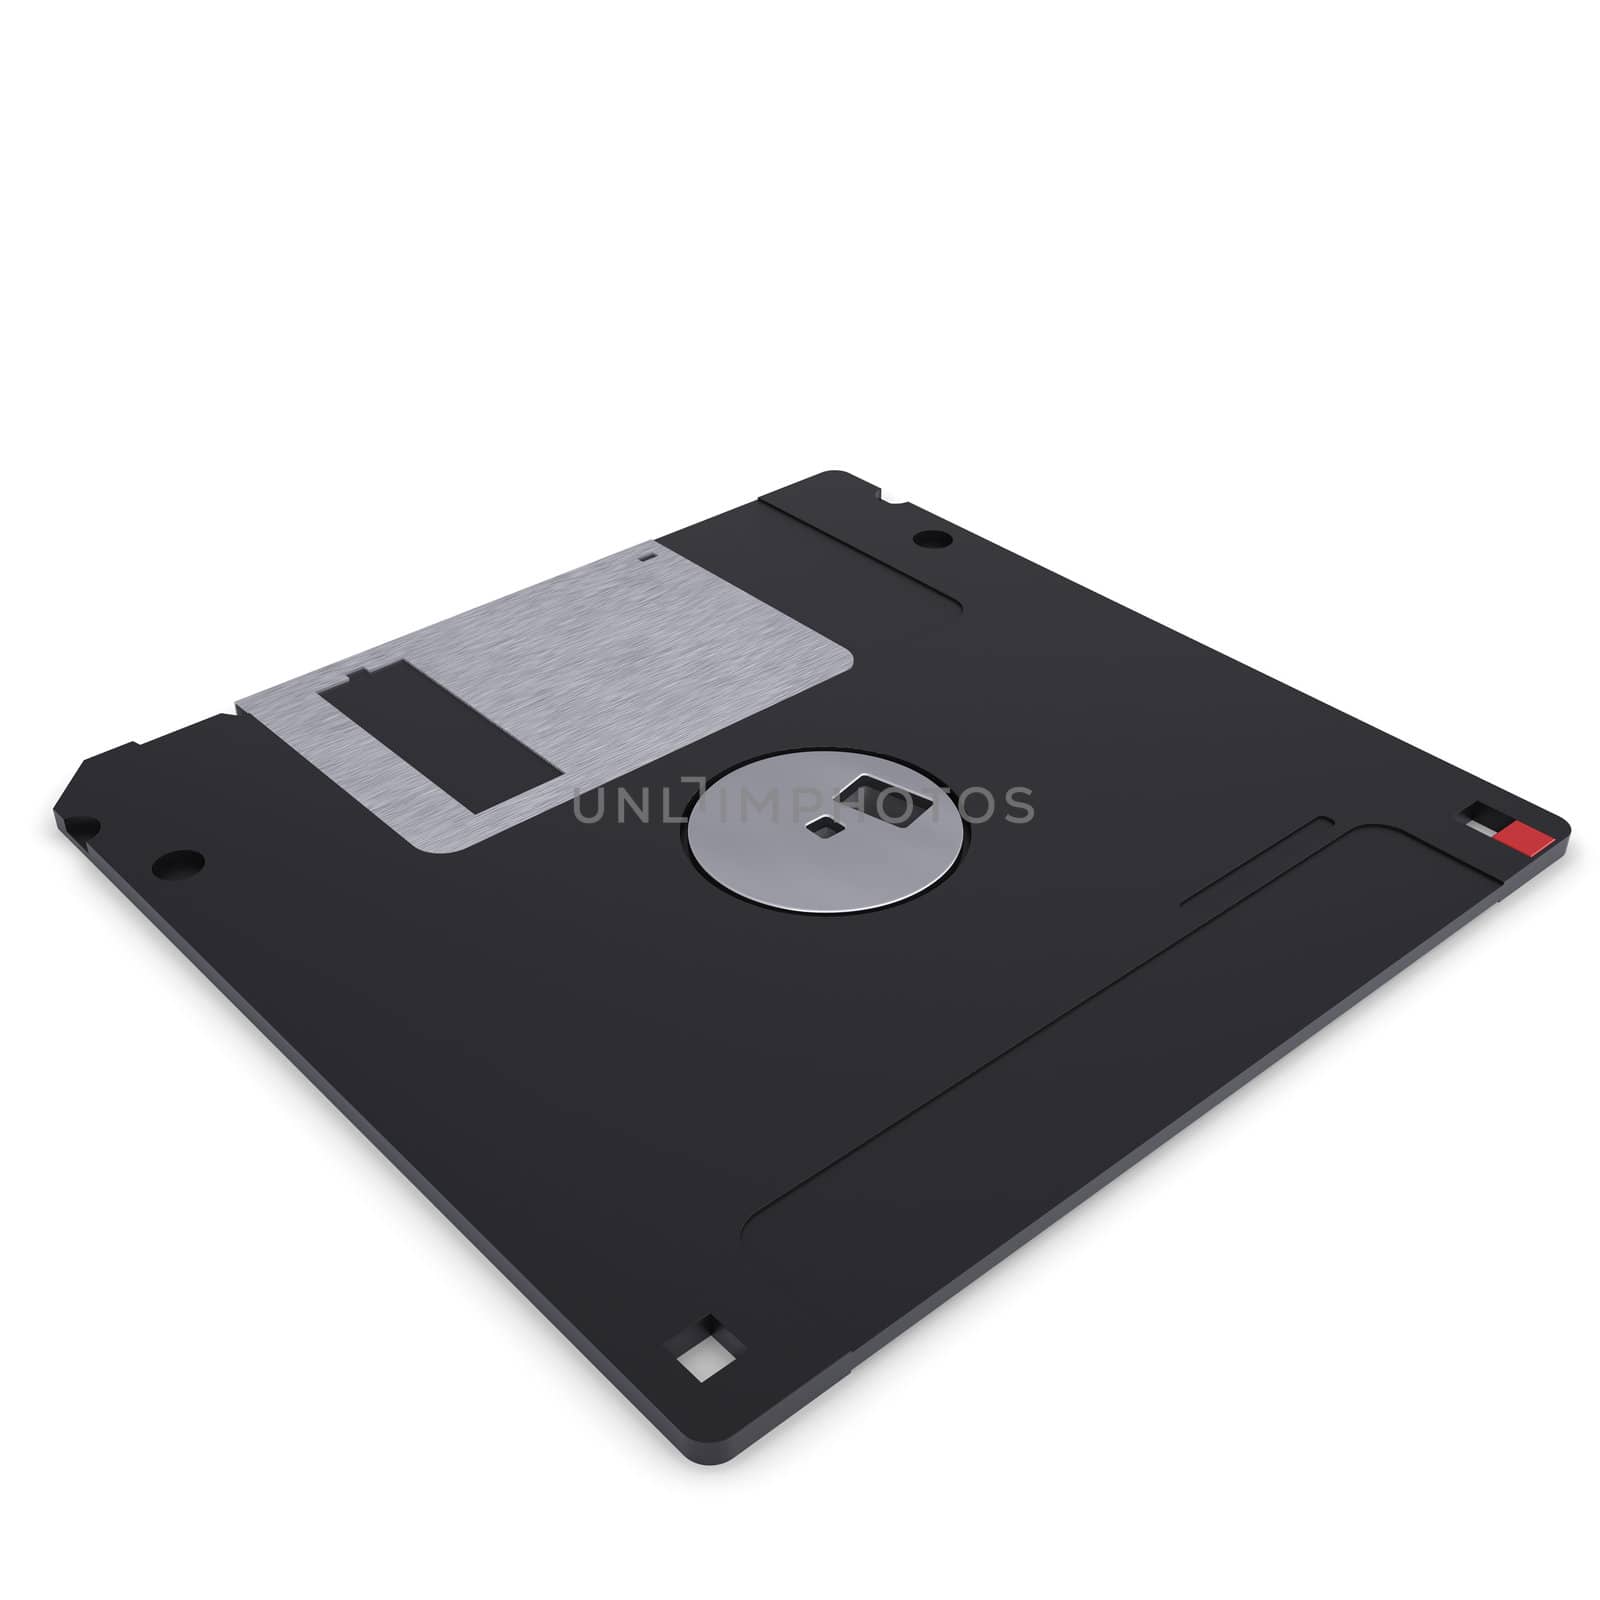 Floppy disk. Isolated render on a white background